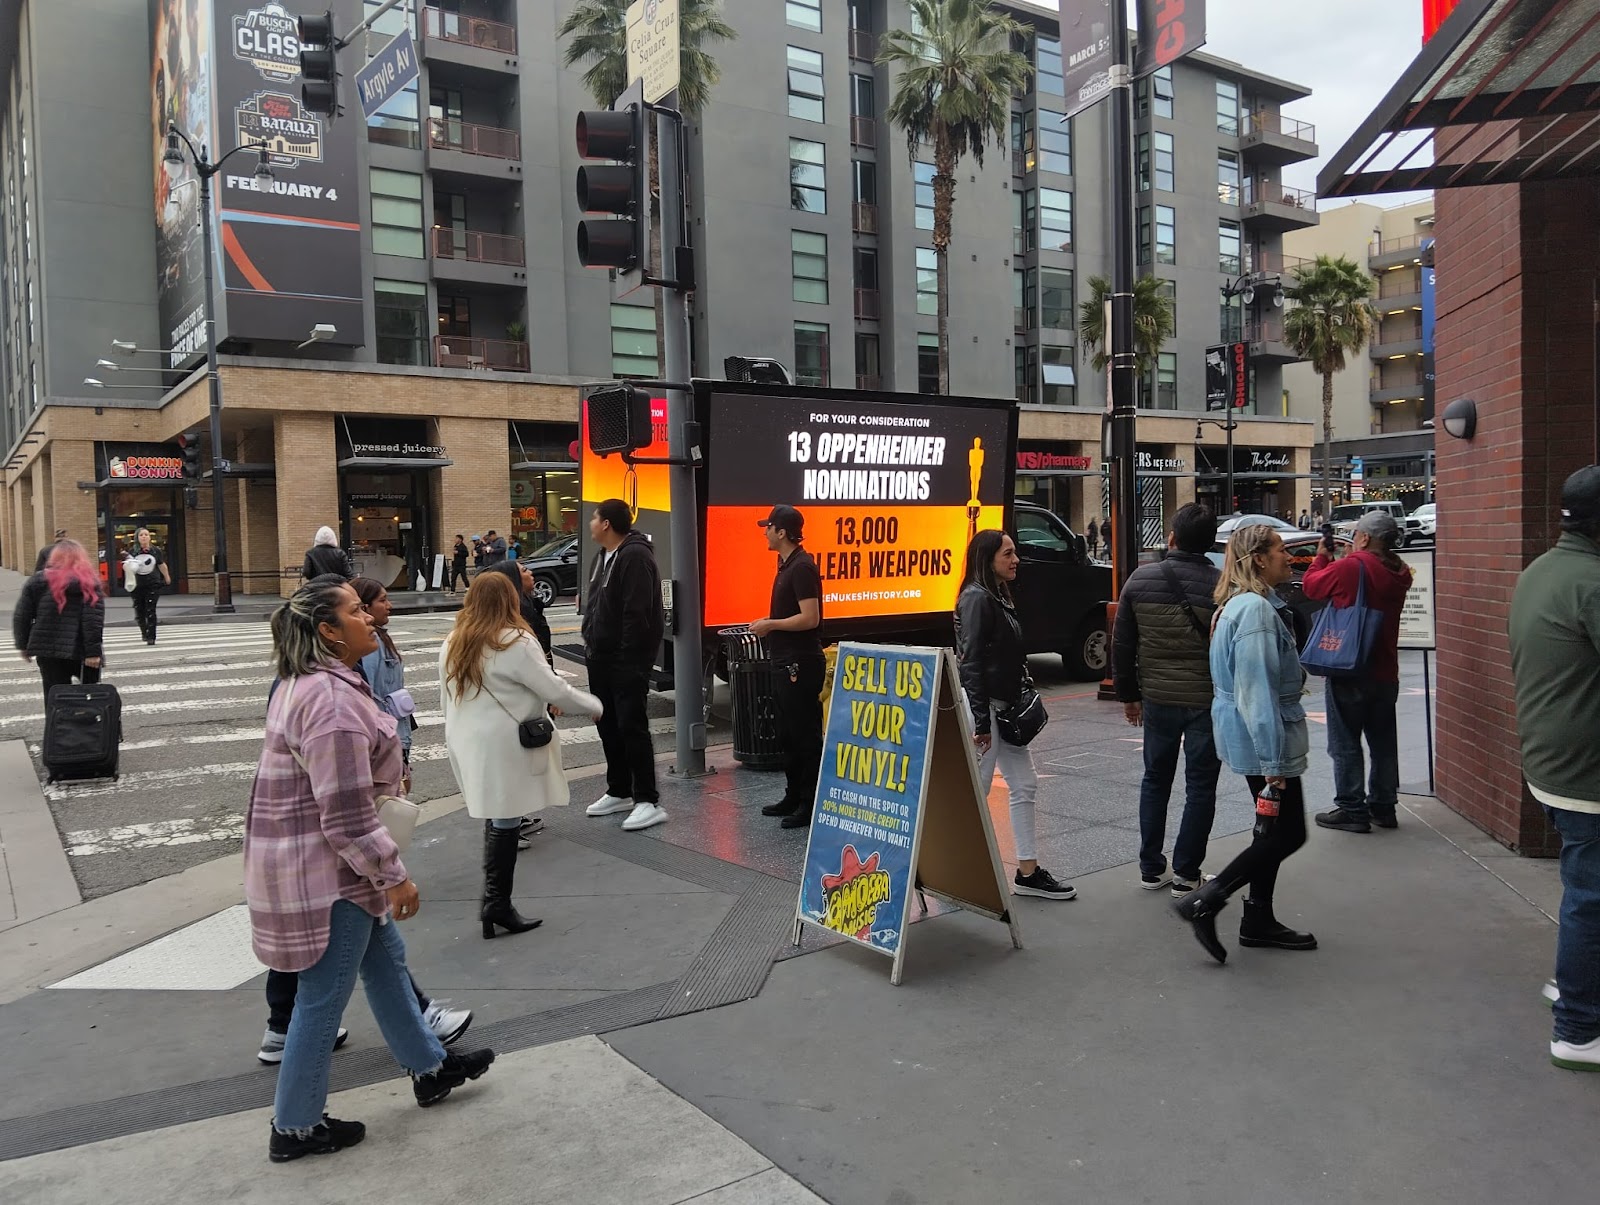 Pedestrians by led advertising truck. LED truck parked near sidewalk and black and orange color with Oppenheimer and weapons.